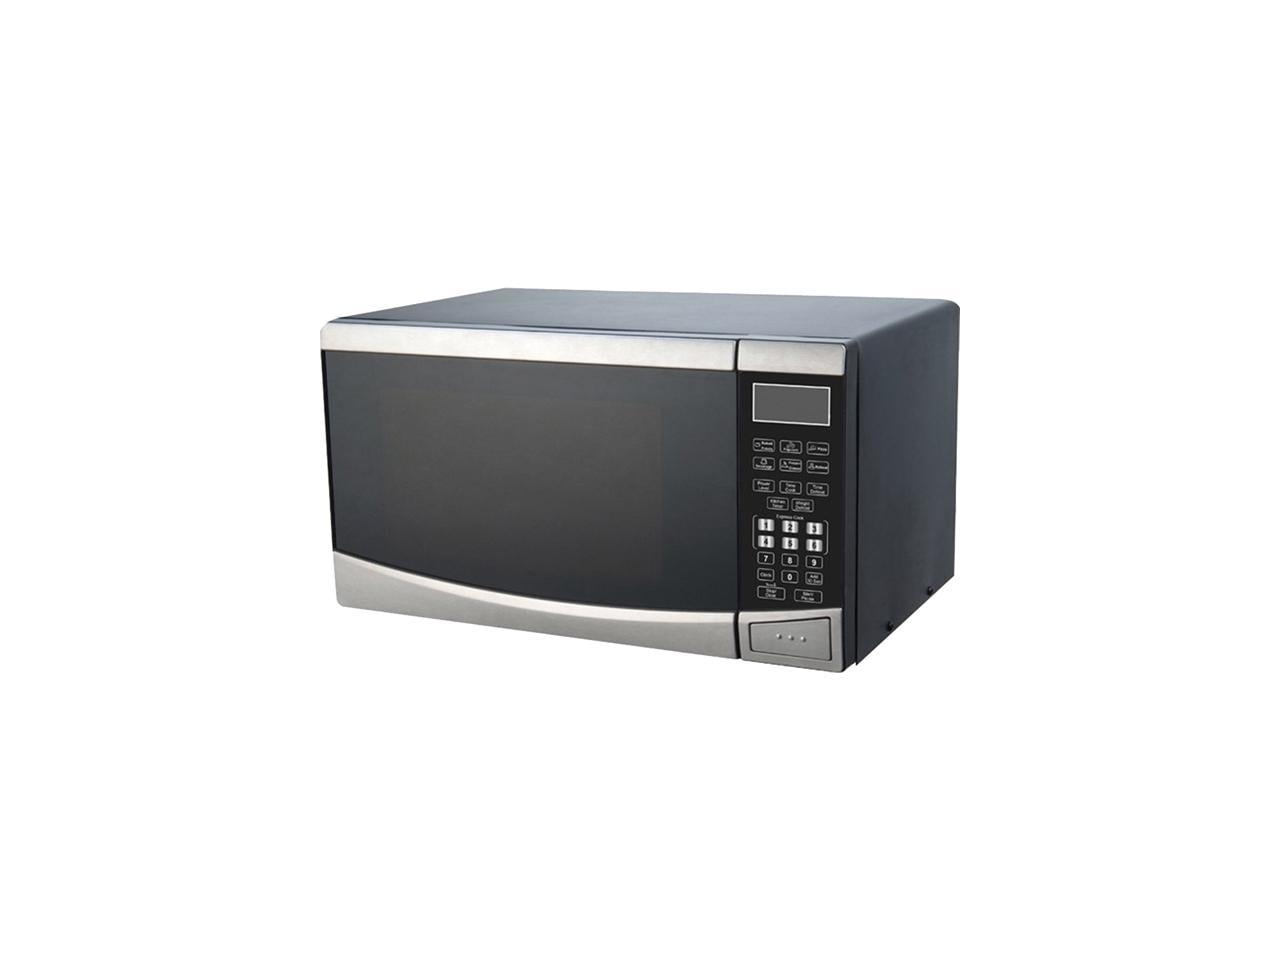 Avanti 0.9 CF Touch Microwave - Stainless Steel 